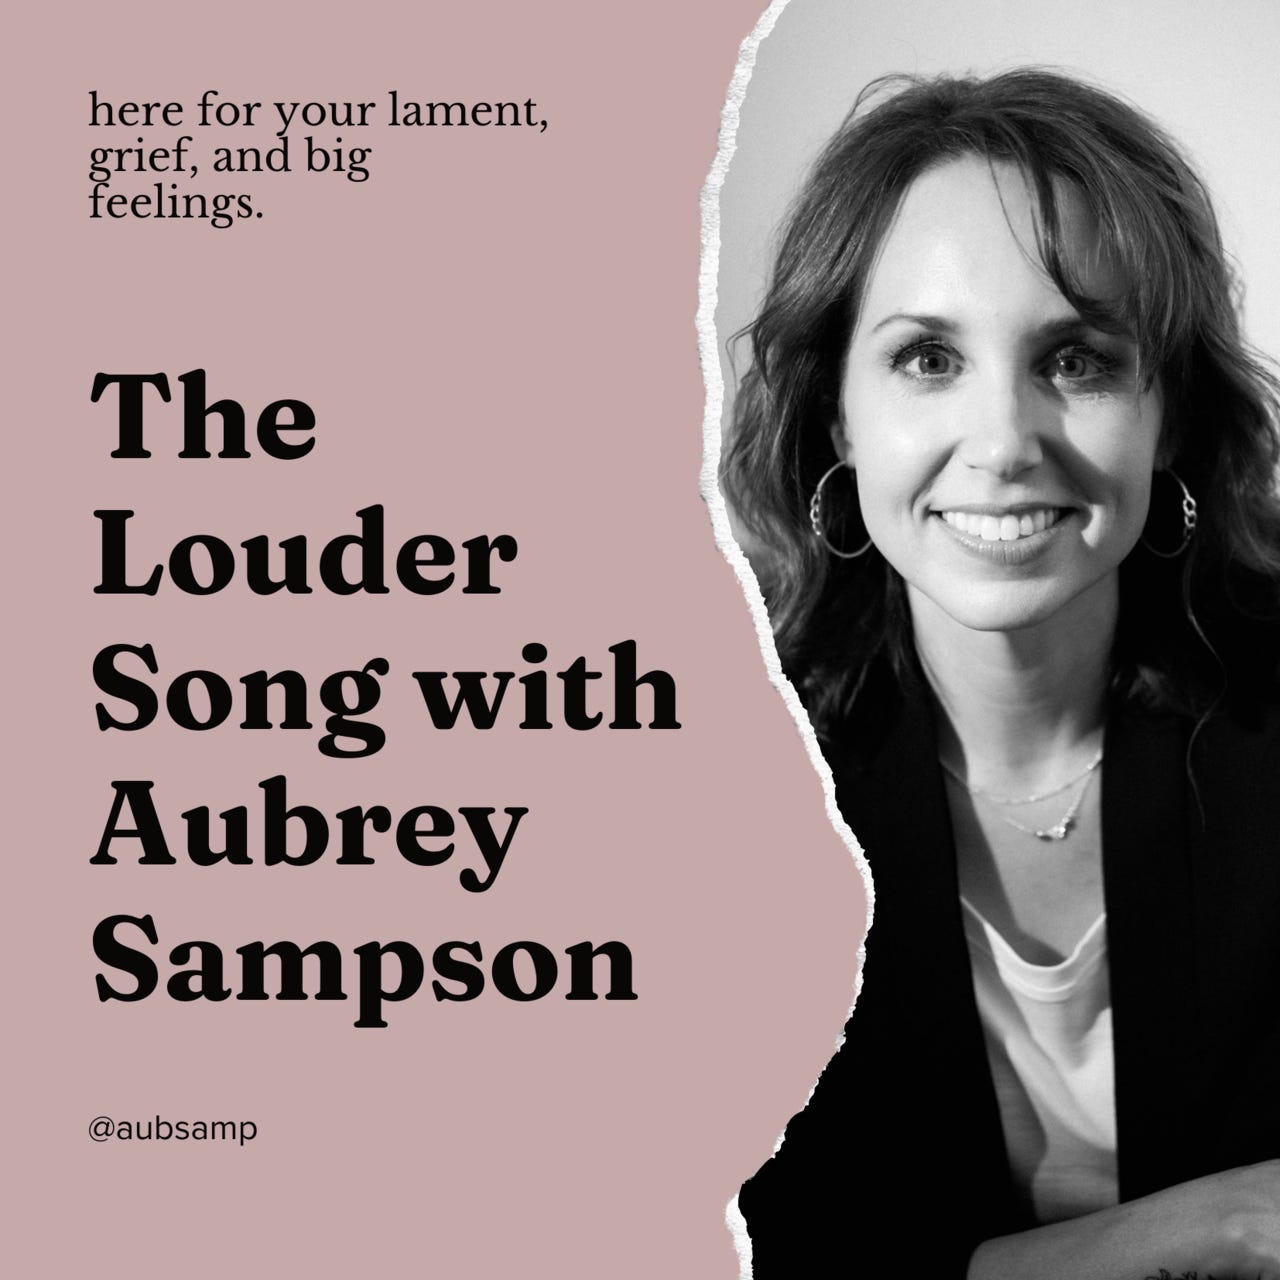 Artwork for "The Louder Song" with Aubrey Sampson